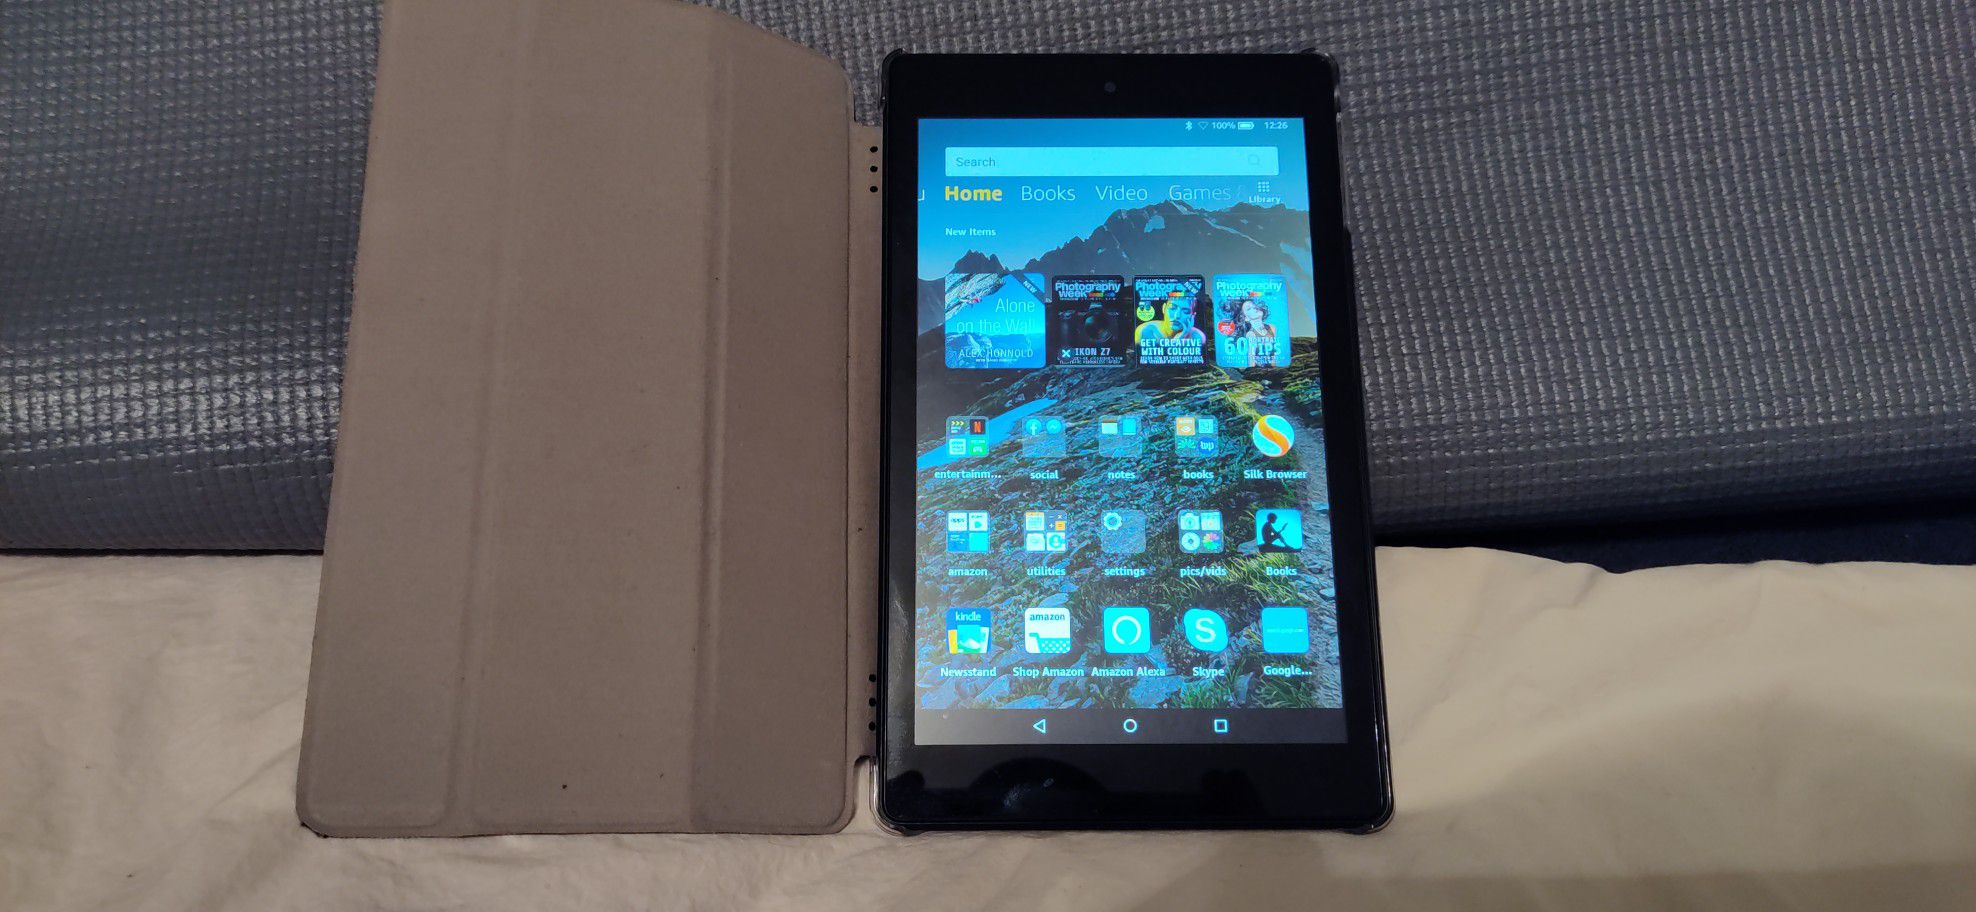 8" HD amazon fire tablet with case